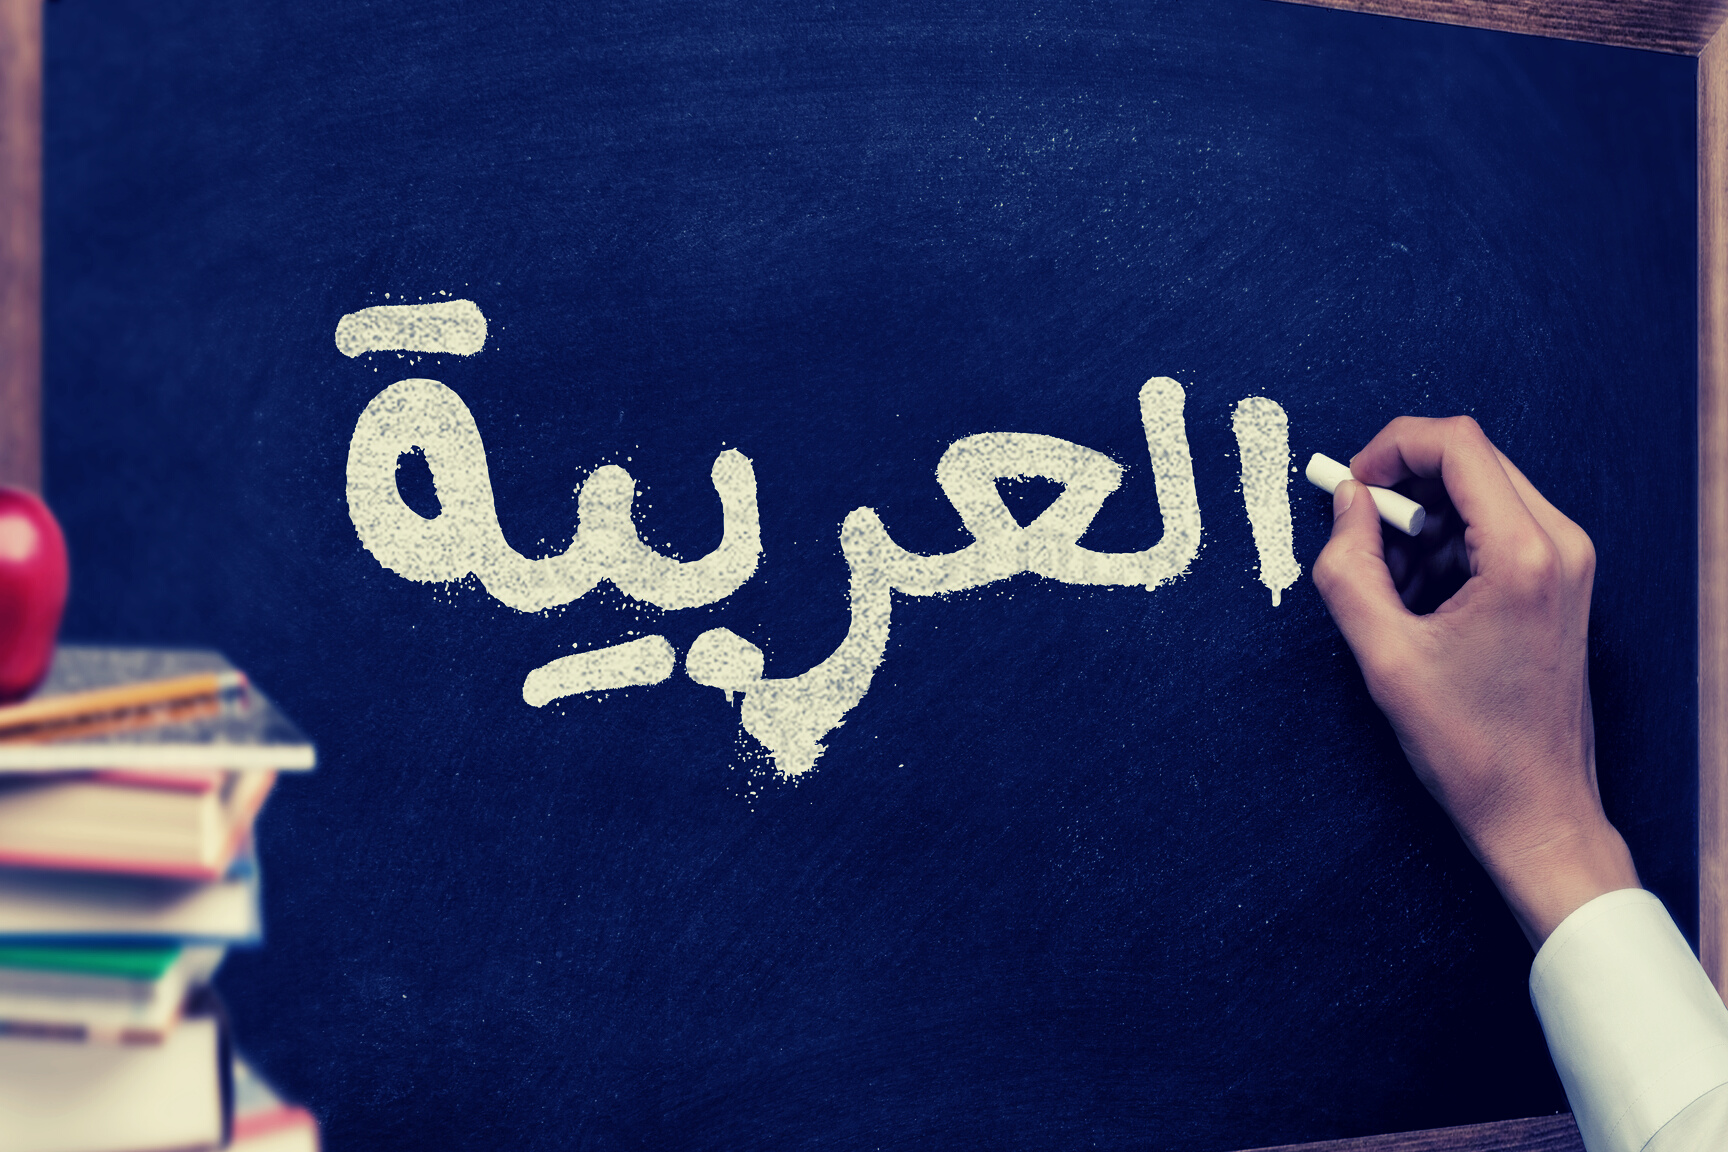 Hand writing on a blackboard in a Arabic language learning class course with the text "Arabic" written on it. with Some books and school materials concept.